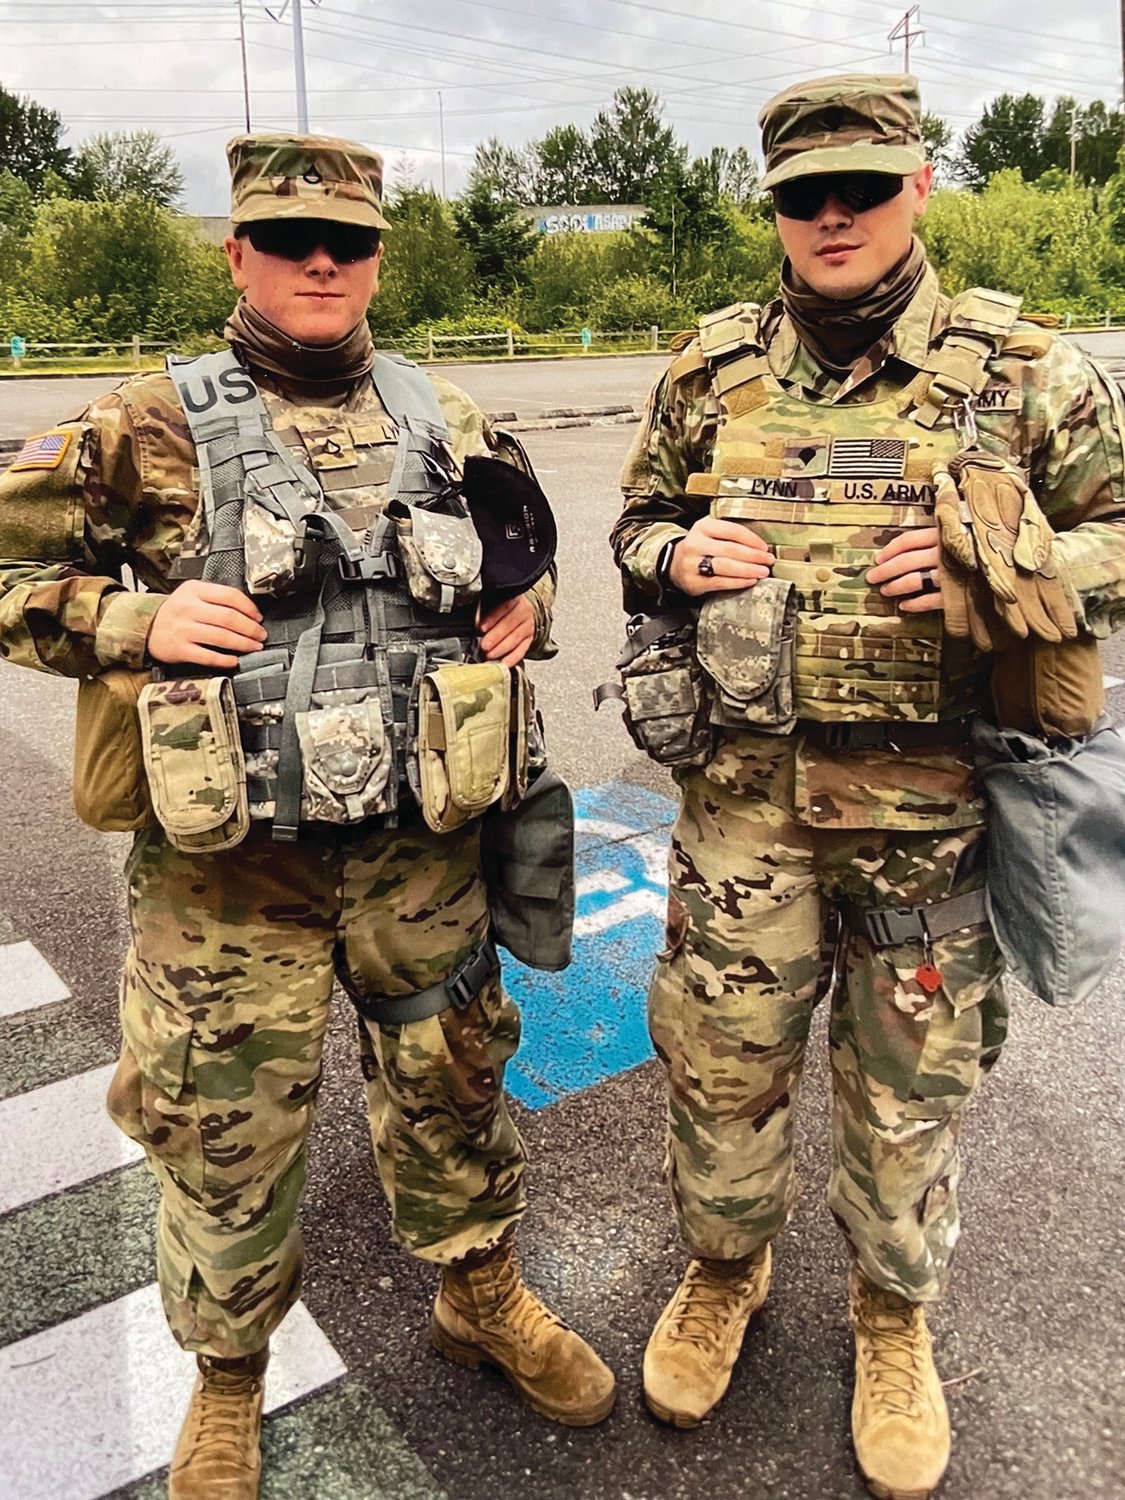 Although they were serving in different units, the Lynn brothers were both called upon to help during the Seattle riots and were pleasantly surprised to run into each other.